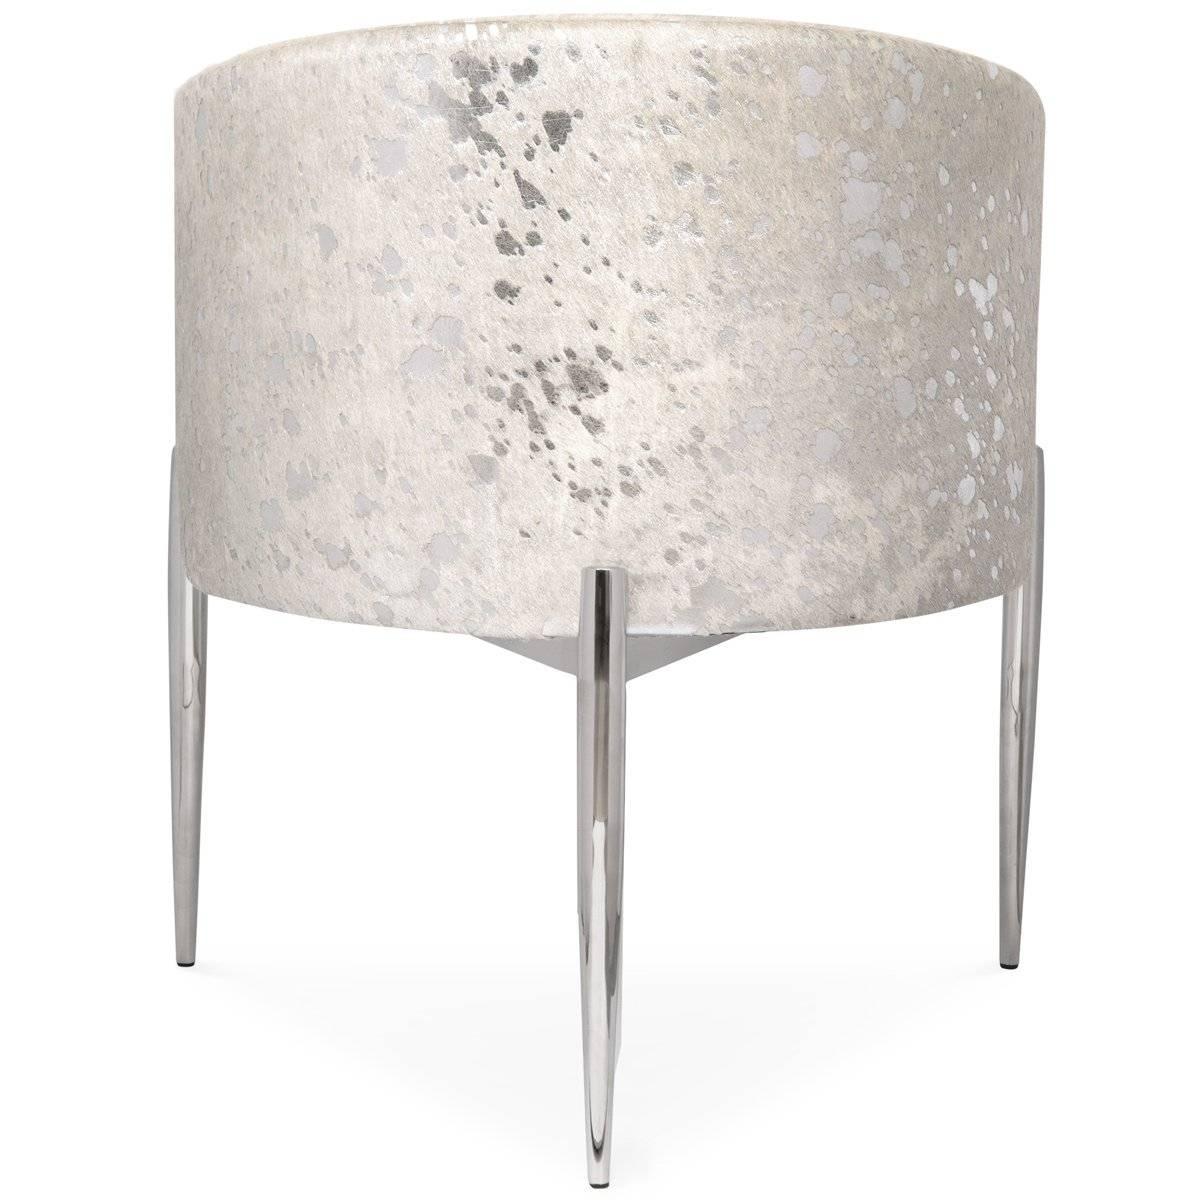 The Art Deco dining chair in silver speckled cowhide. This sophisticated and unique seat sits staunchly over a chrome three-leg base and remains true to the Art Deco theme by offering a curvilinear shape and a sharp outline. A perfect way to add a